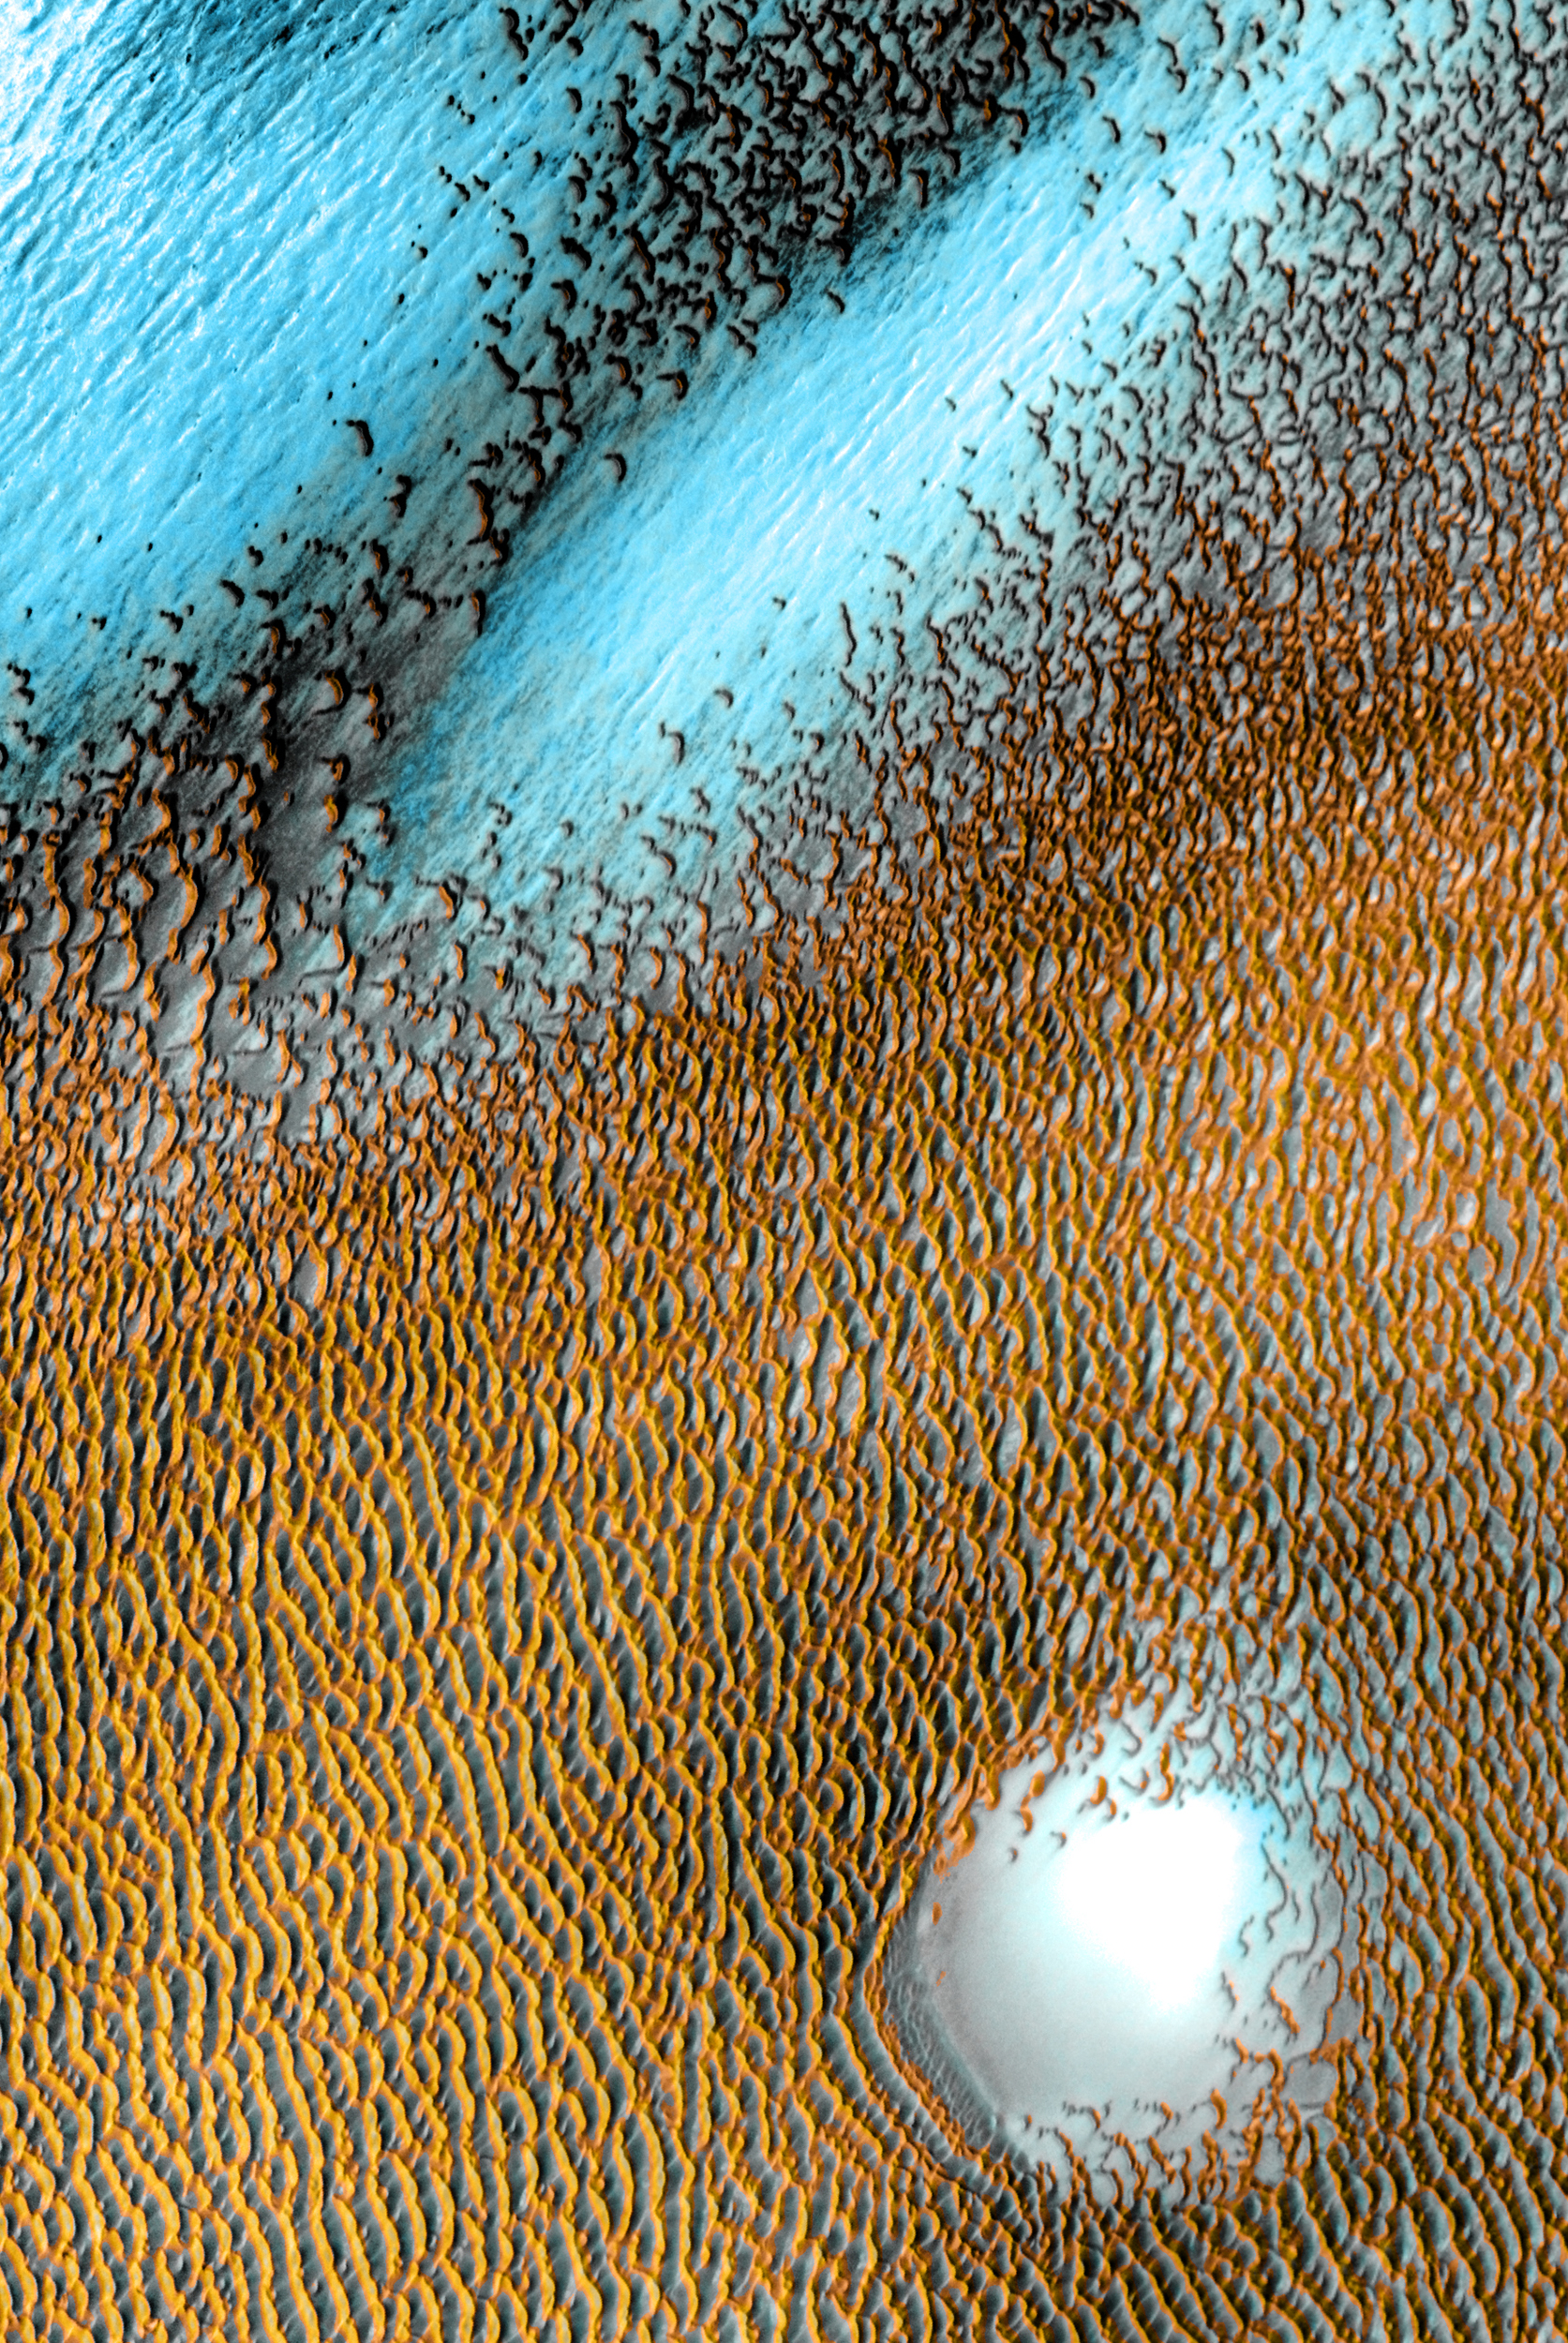 A sea of dark dunes, sculpted by the wind into long lines, surrounds the northern polar cap. This image covers an area 19 miles wide. This scene combines images taken during the period from Dec. 2002 to Nov. 2004 by the Thermal Emission Imaging System instrument on NASA's Mars Odyssey orbiter.